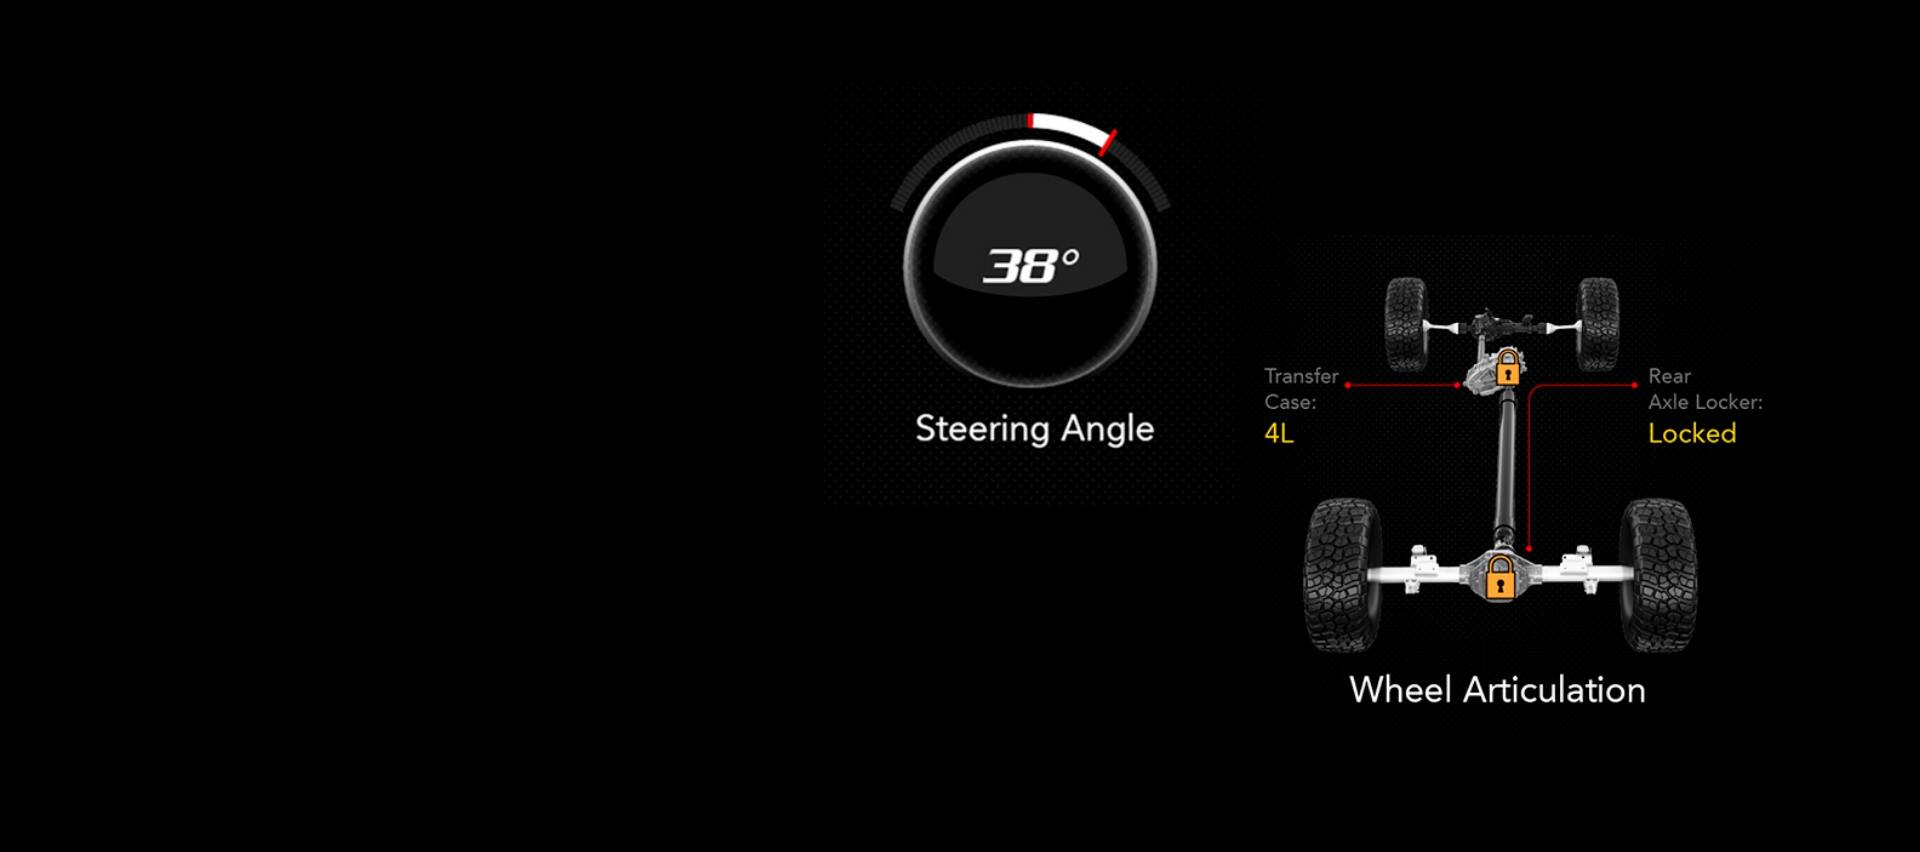 The vehicle dynamics screen in the 2022 Ram TRX, displaying steering angle and wheel articulation.